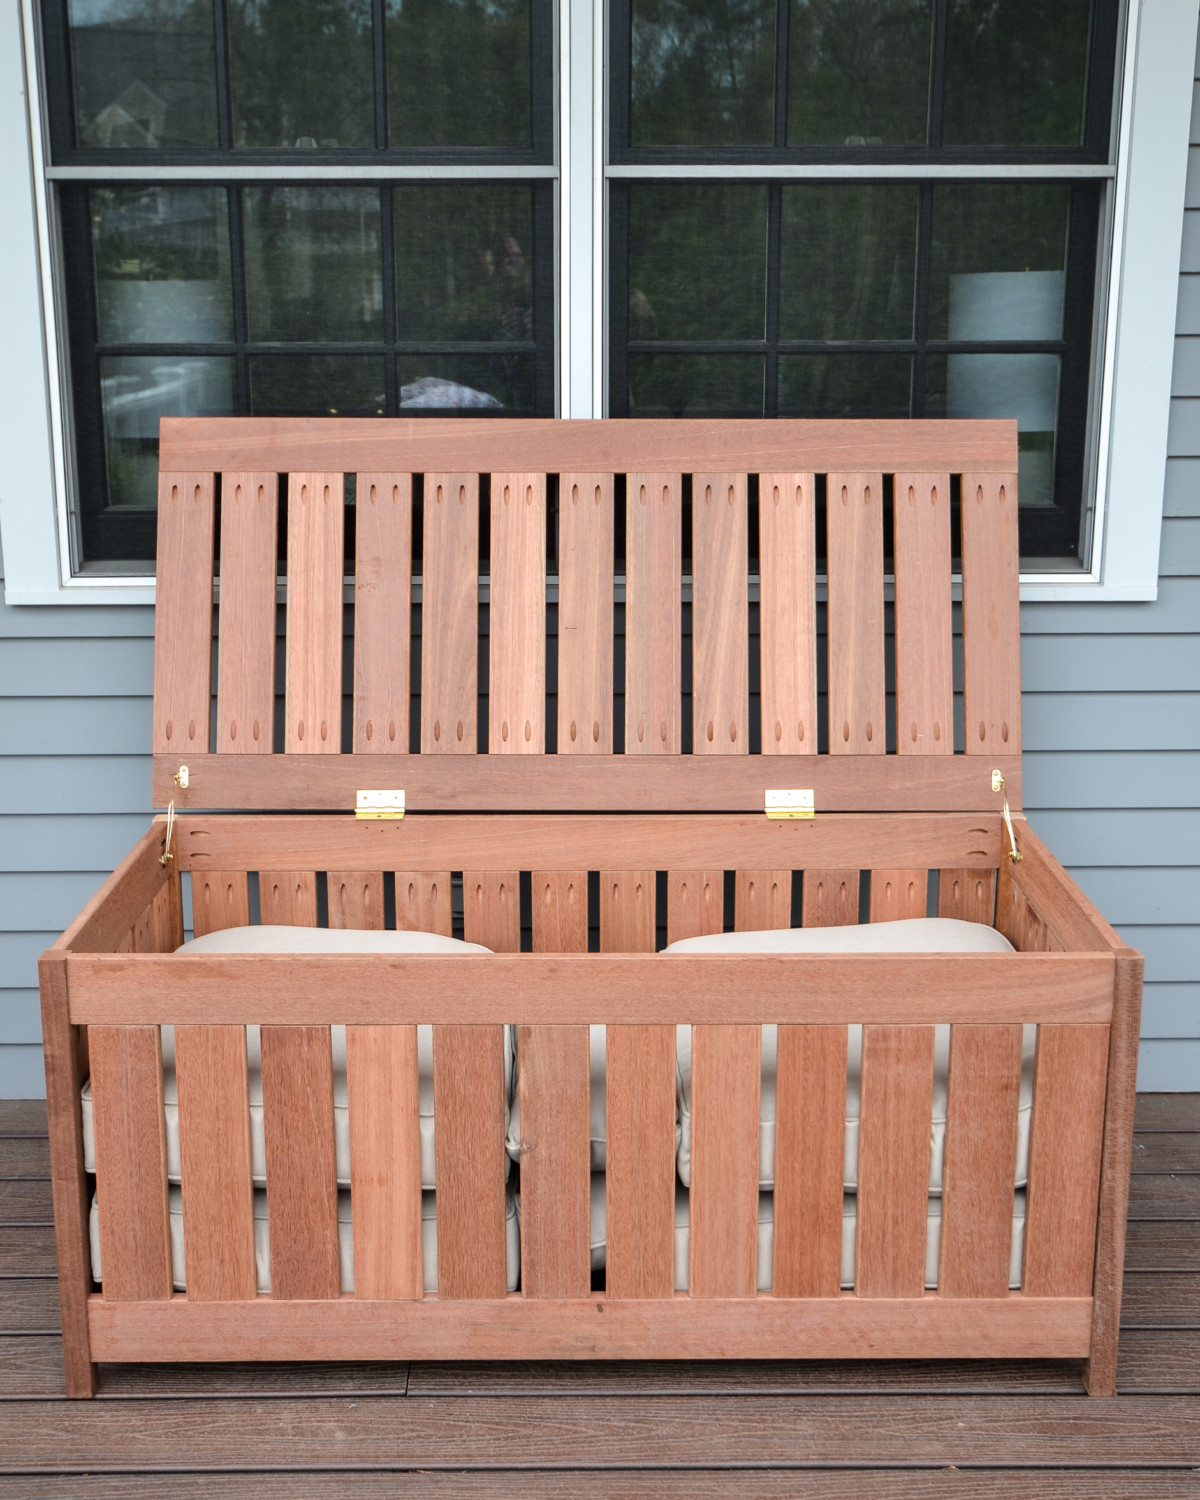 DIY Outdoor Bench With Storage
 DIY Outdoor Storage Box The Chronicles of Home